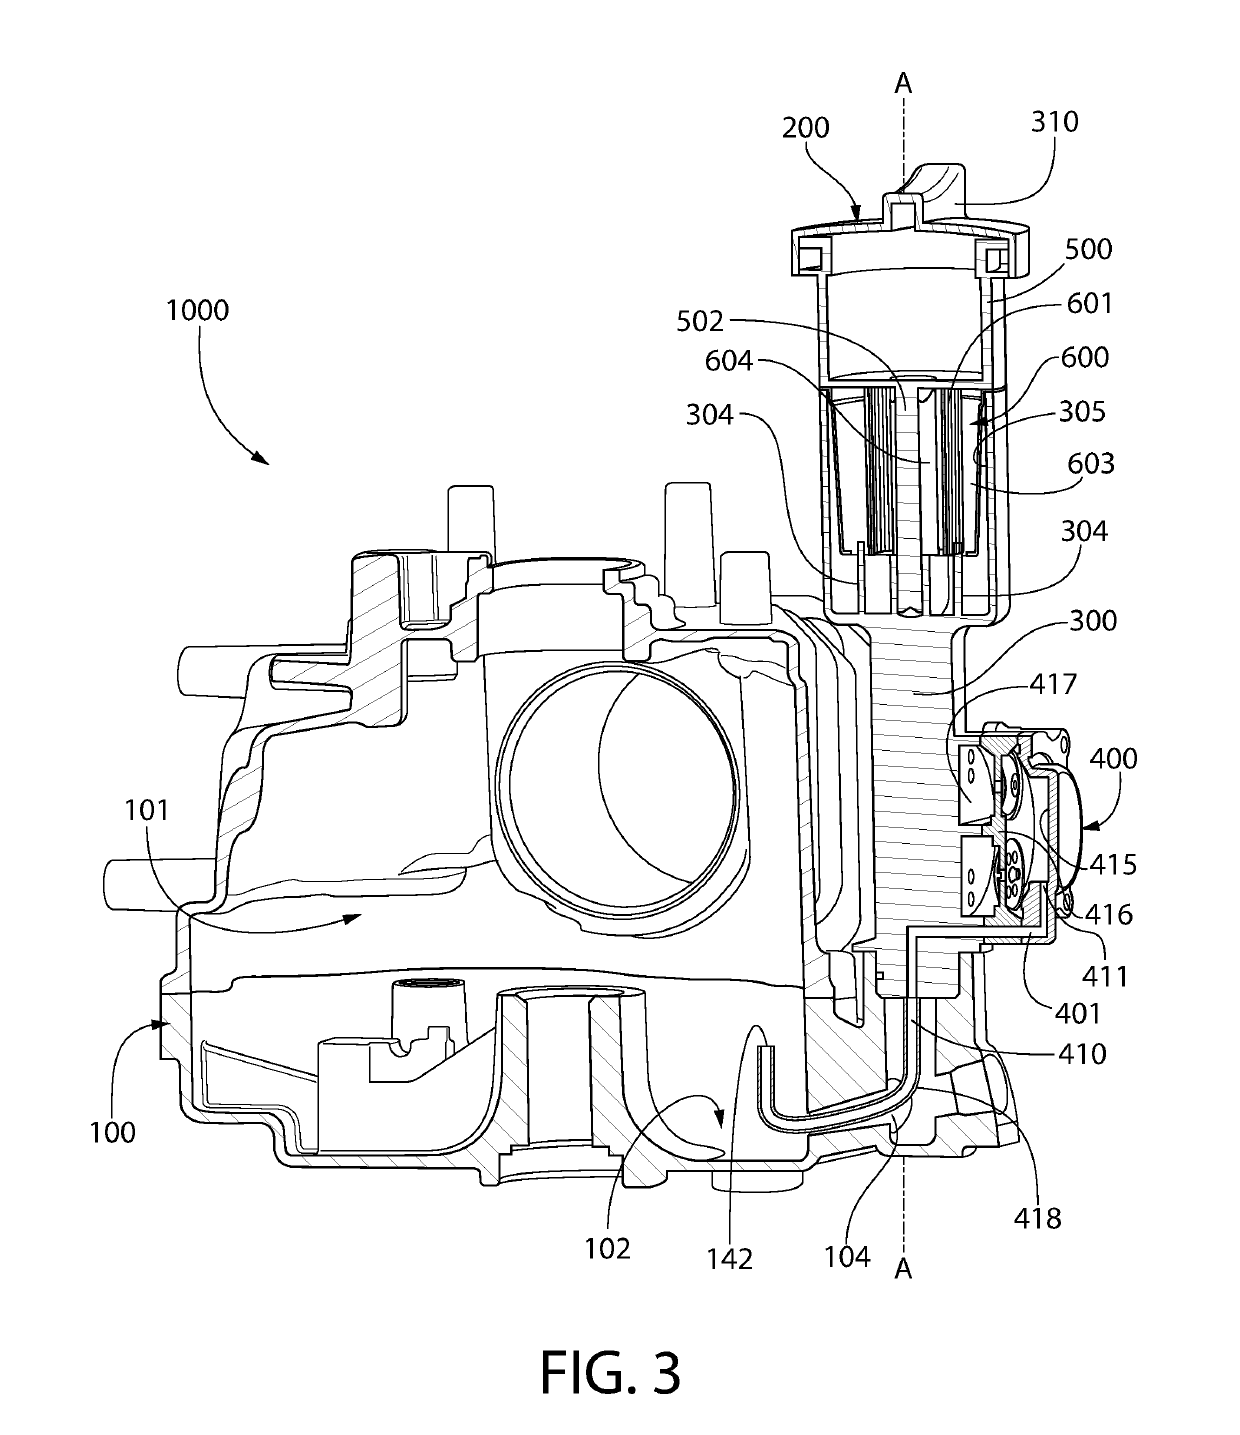 Internal combustion engine and oil treatment apparatus for use with the same